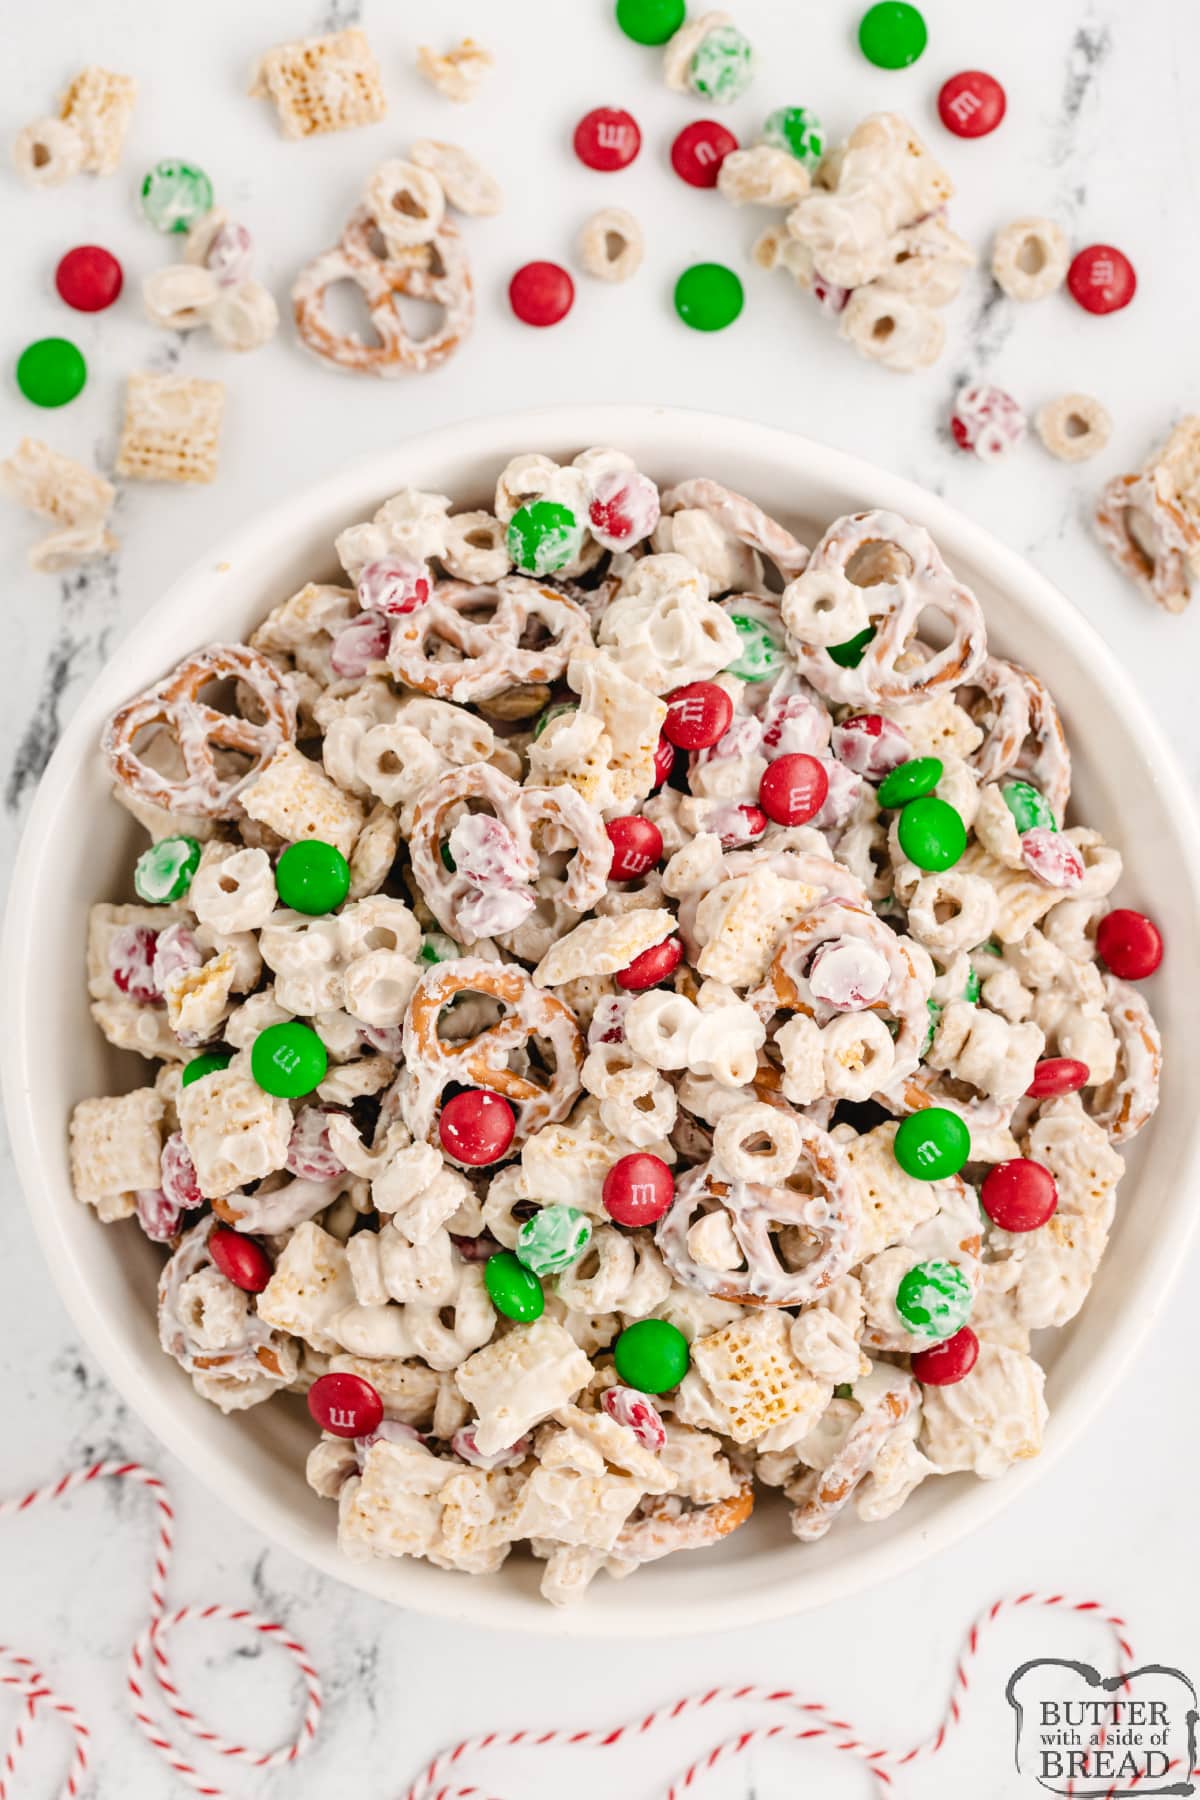 Pretzels, Chex, Cheerios, M&Ms mixed with white chocolate. 